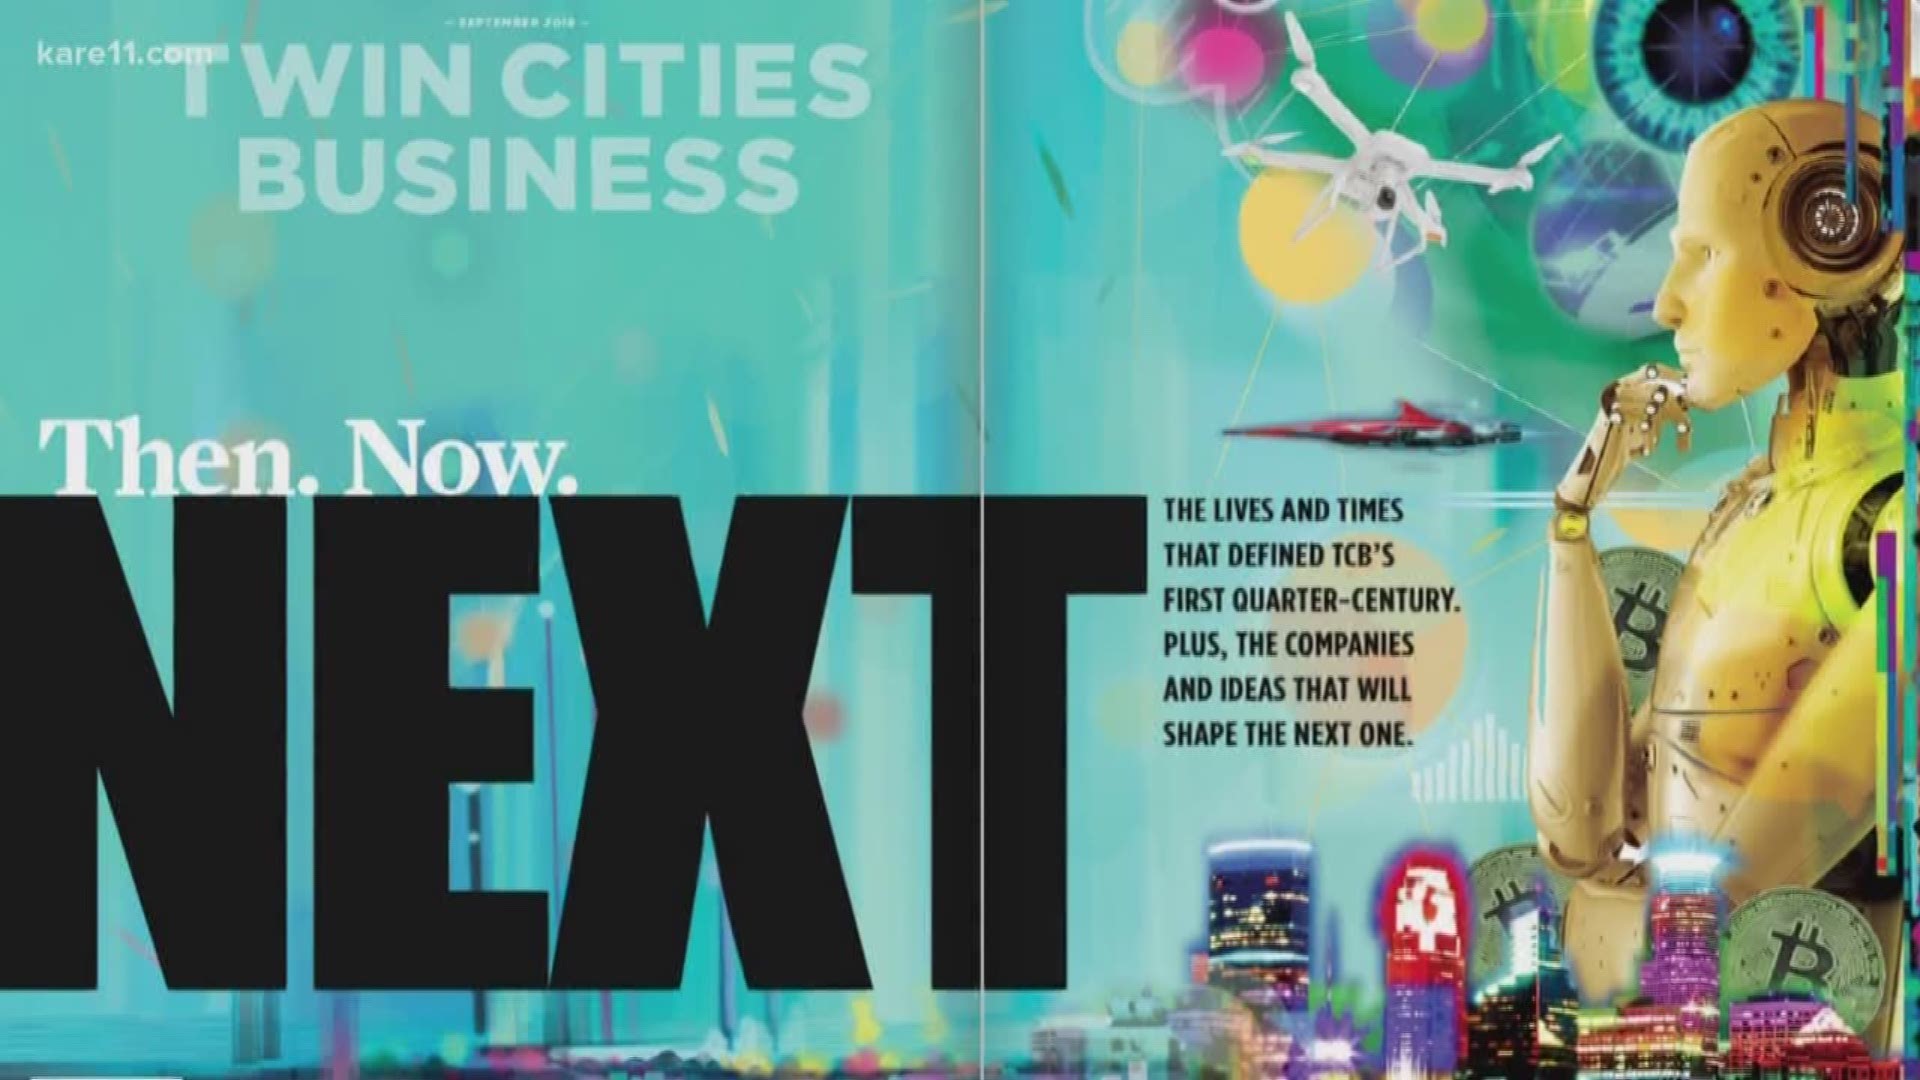 Twin Cities Business is celebrating its 25th anniversary with a special issue exploring Minnesota's important achievements of the past, and examining 25 companies and trends awaiting us in the future. https://kare11.tv/2xtKV0z